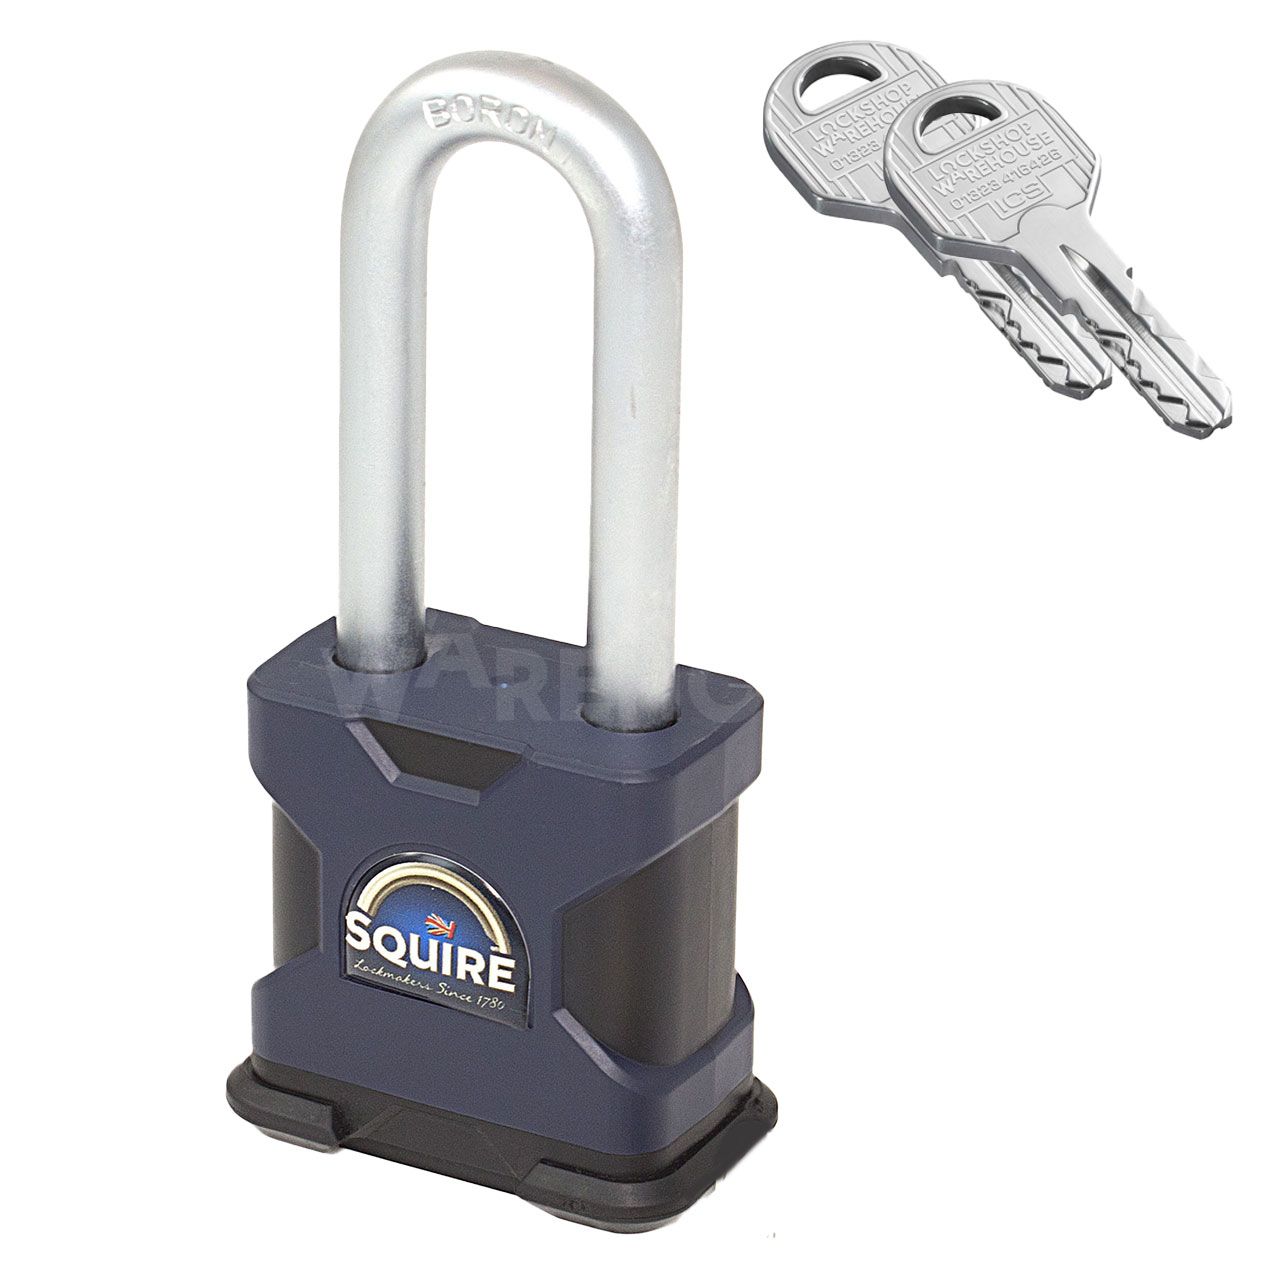 SQUIRE SS50S Stronghold® Long Shackle Padlock with EVVA ICS key - Fully Protected key